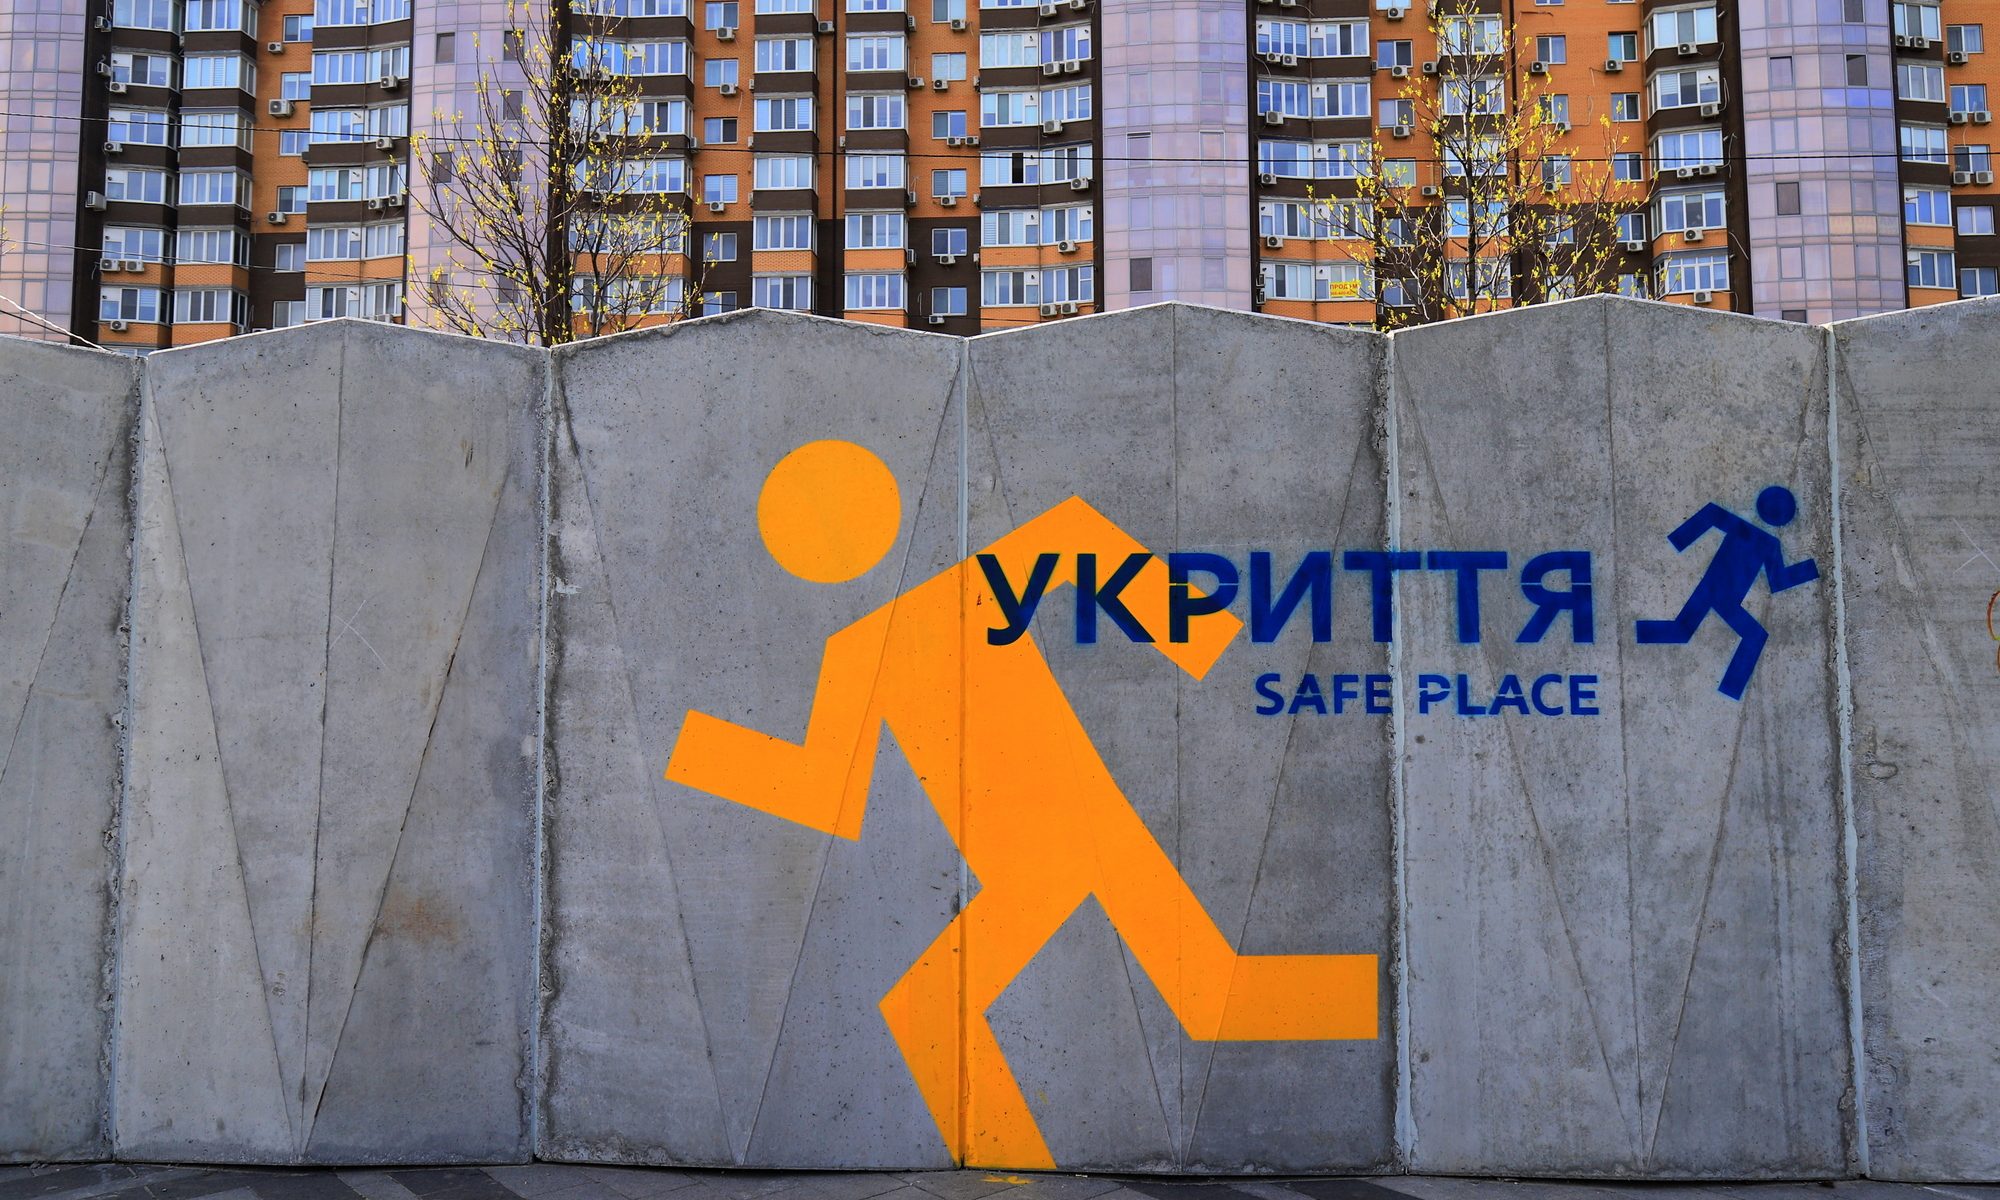 photograph of bomb shelter sign in Ukraine